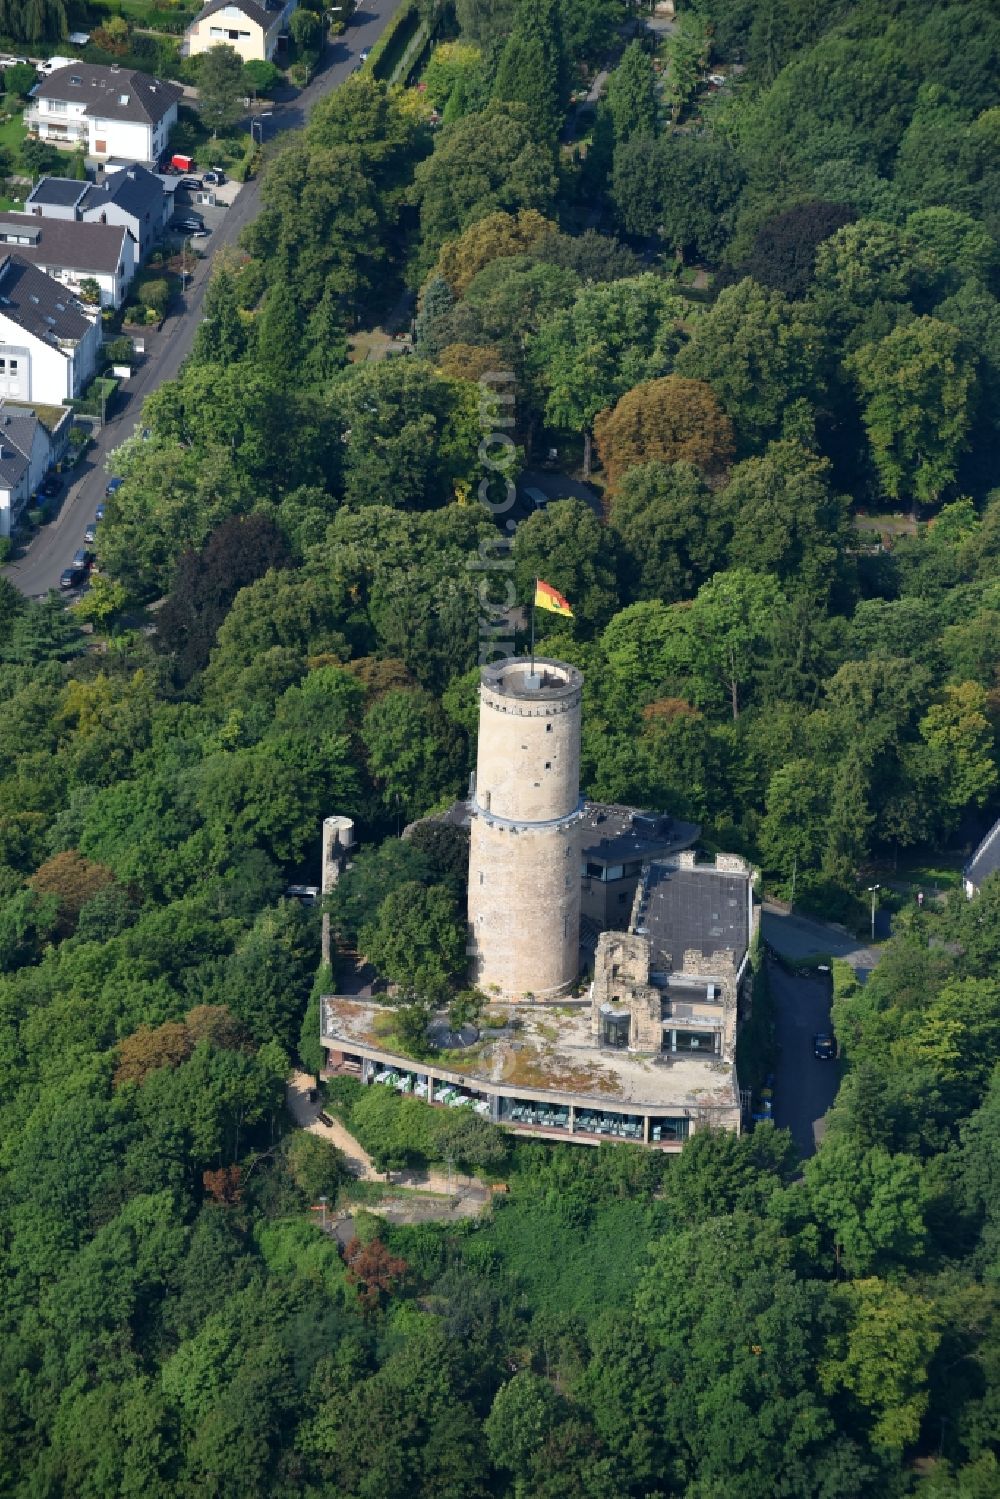 Aerial image Bonn - Ruins and vestiges of the former castle and fortress Godesburg Auf dem Godesberg in the district Bad Godesberg in Bonn in the state North Rhine-Westphalia, Germany